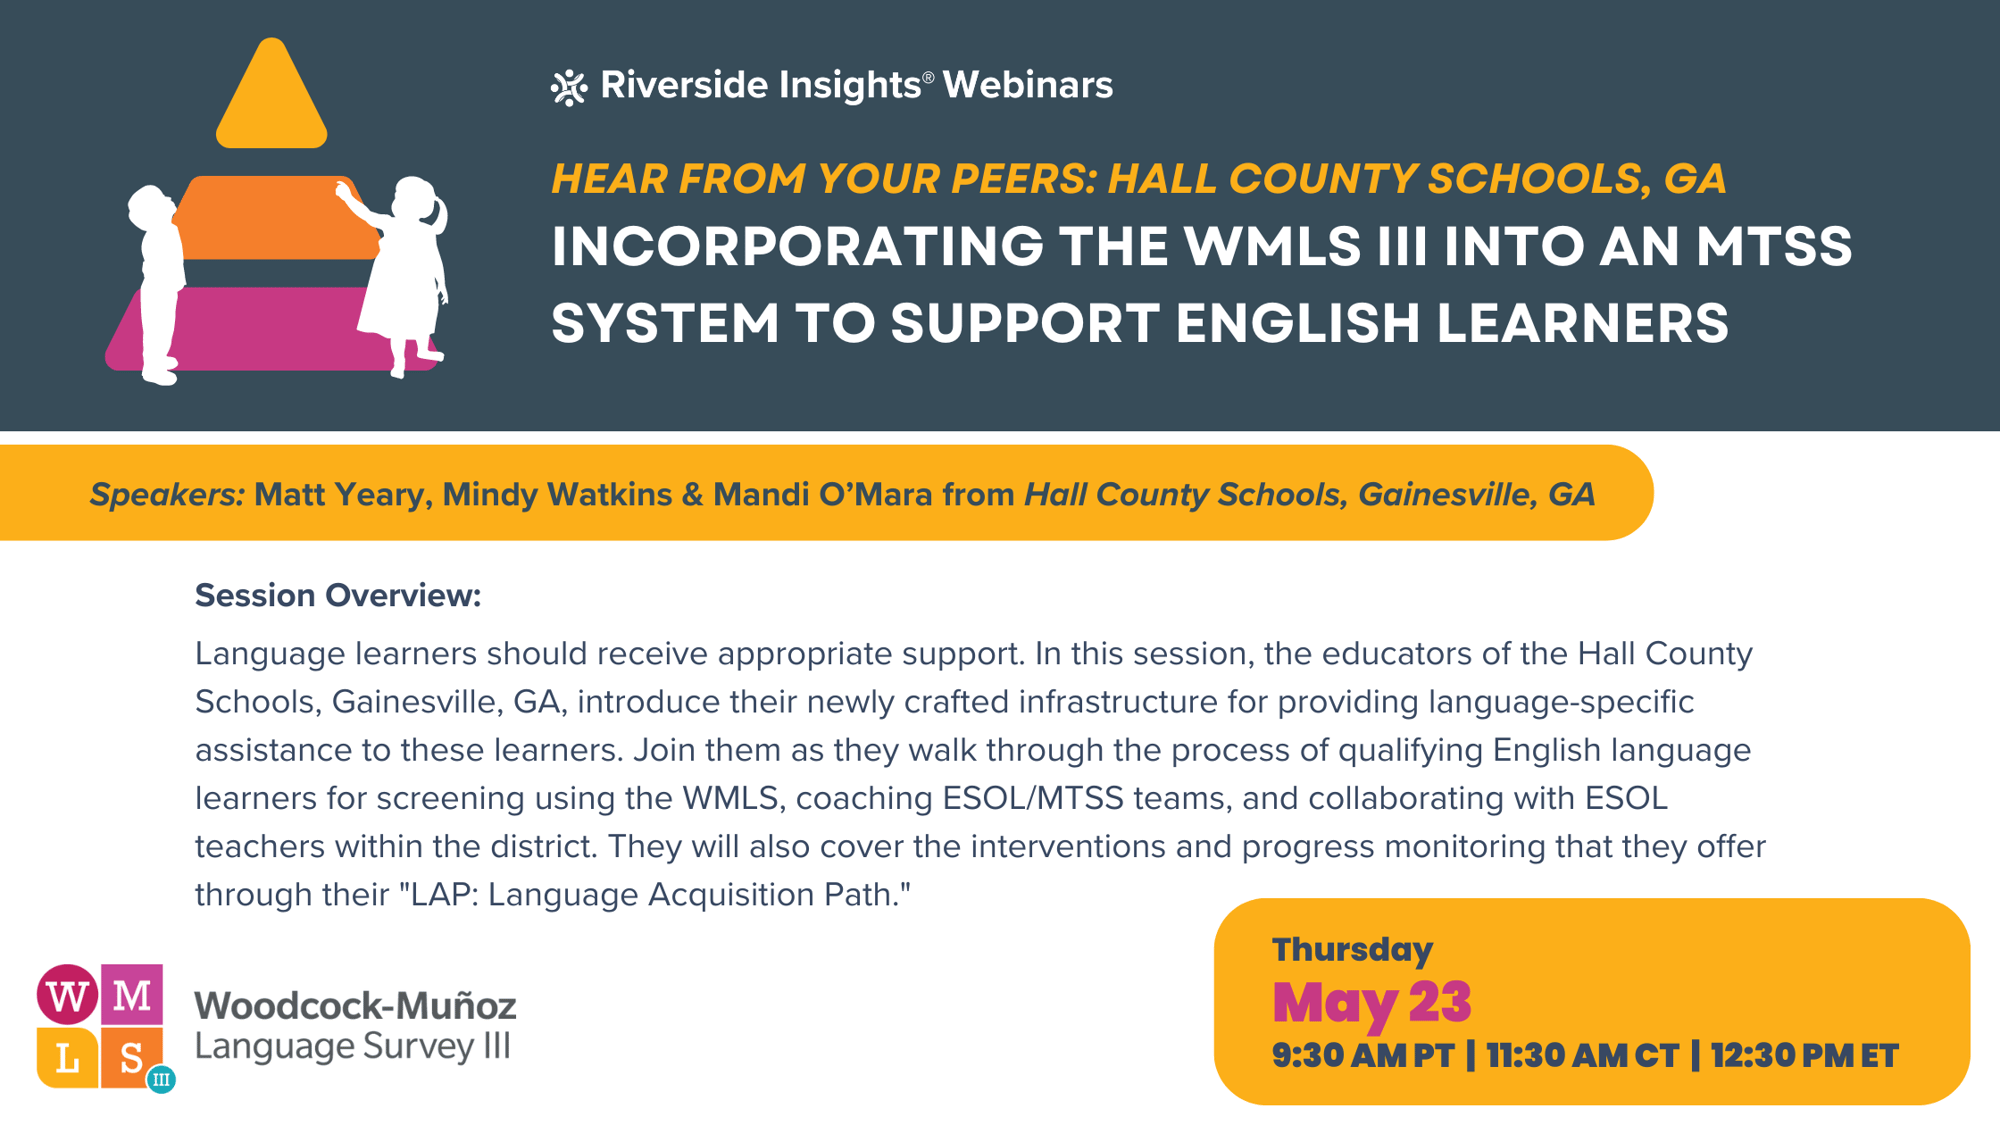 Hear From Your Peers: Incorporating the WMLS III into an MTSS System to Support English Learners